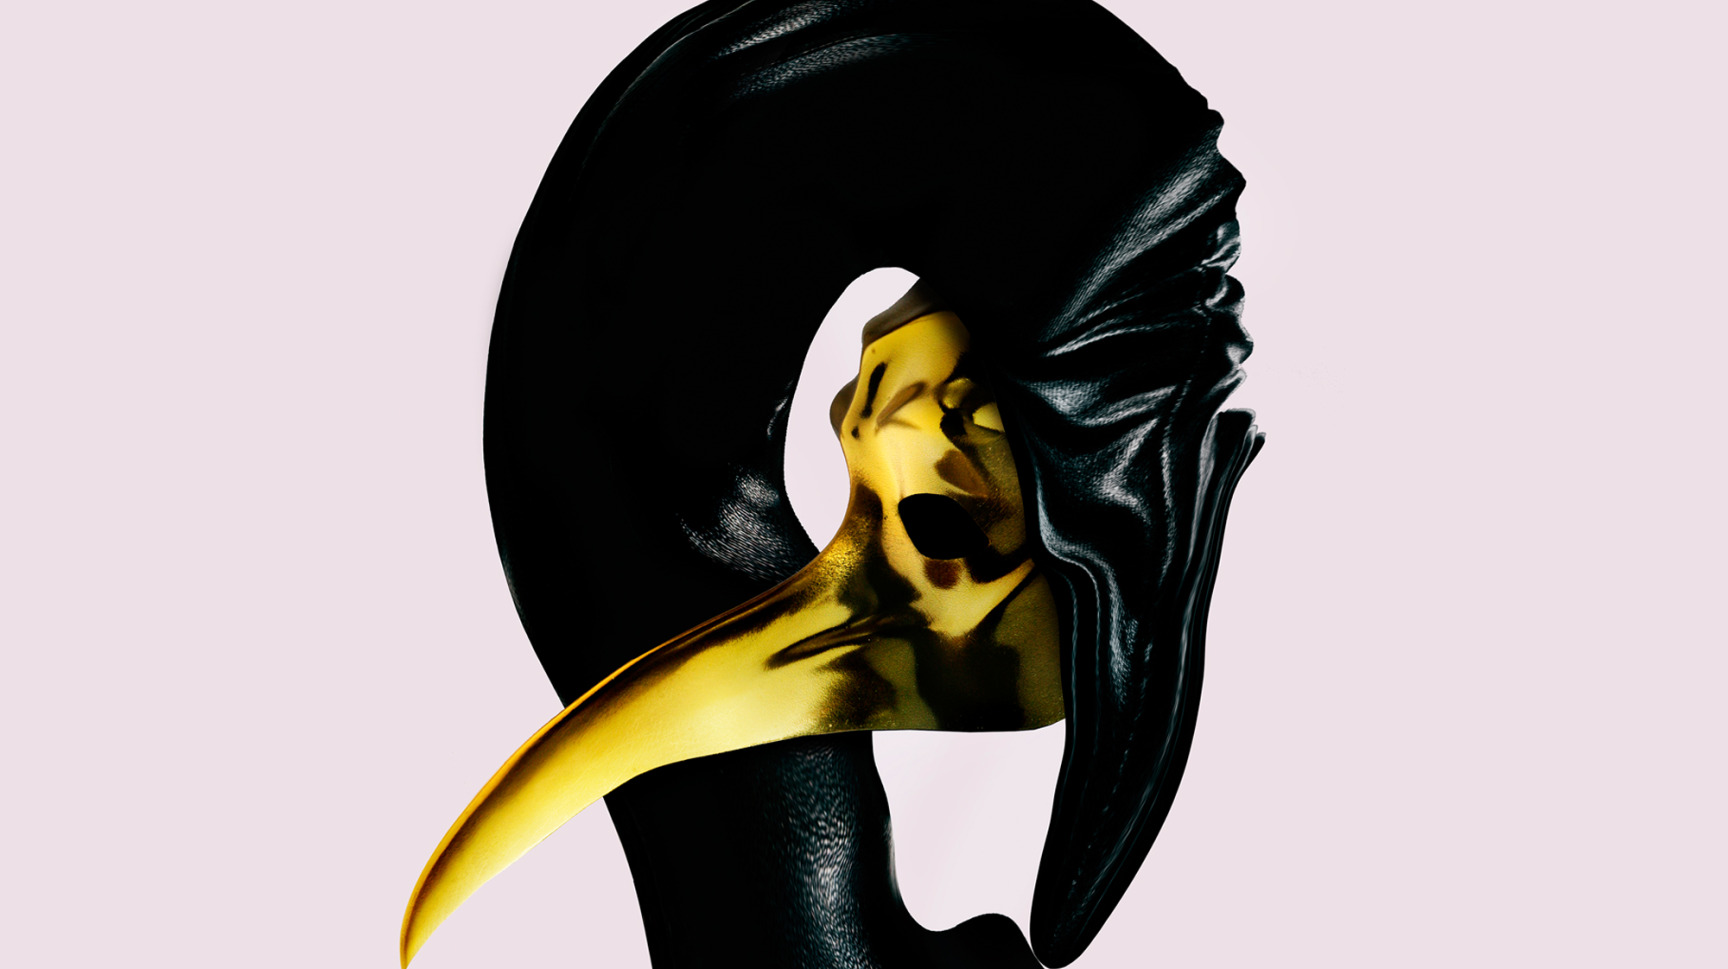 Music<br /><strong>Claptone</strong>